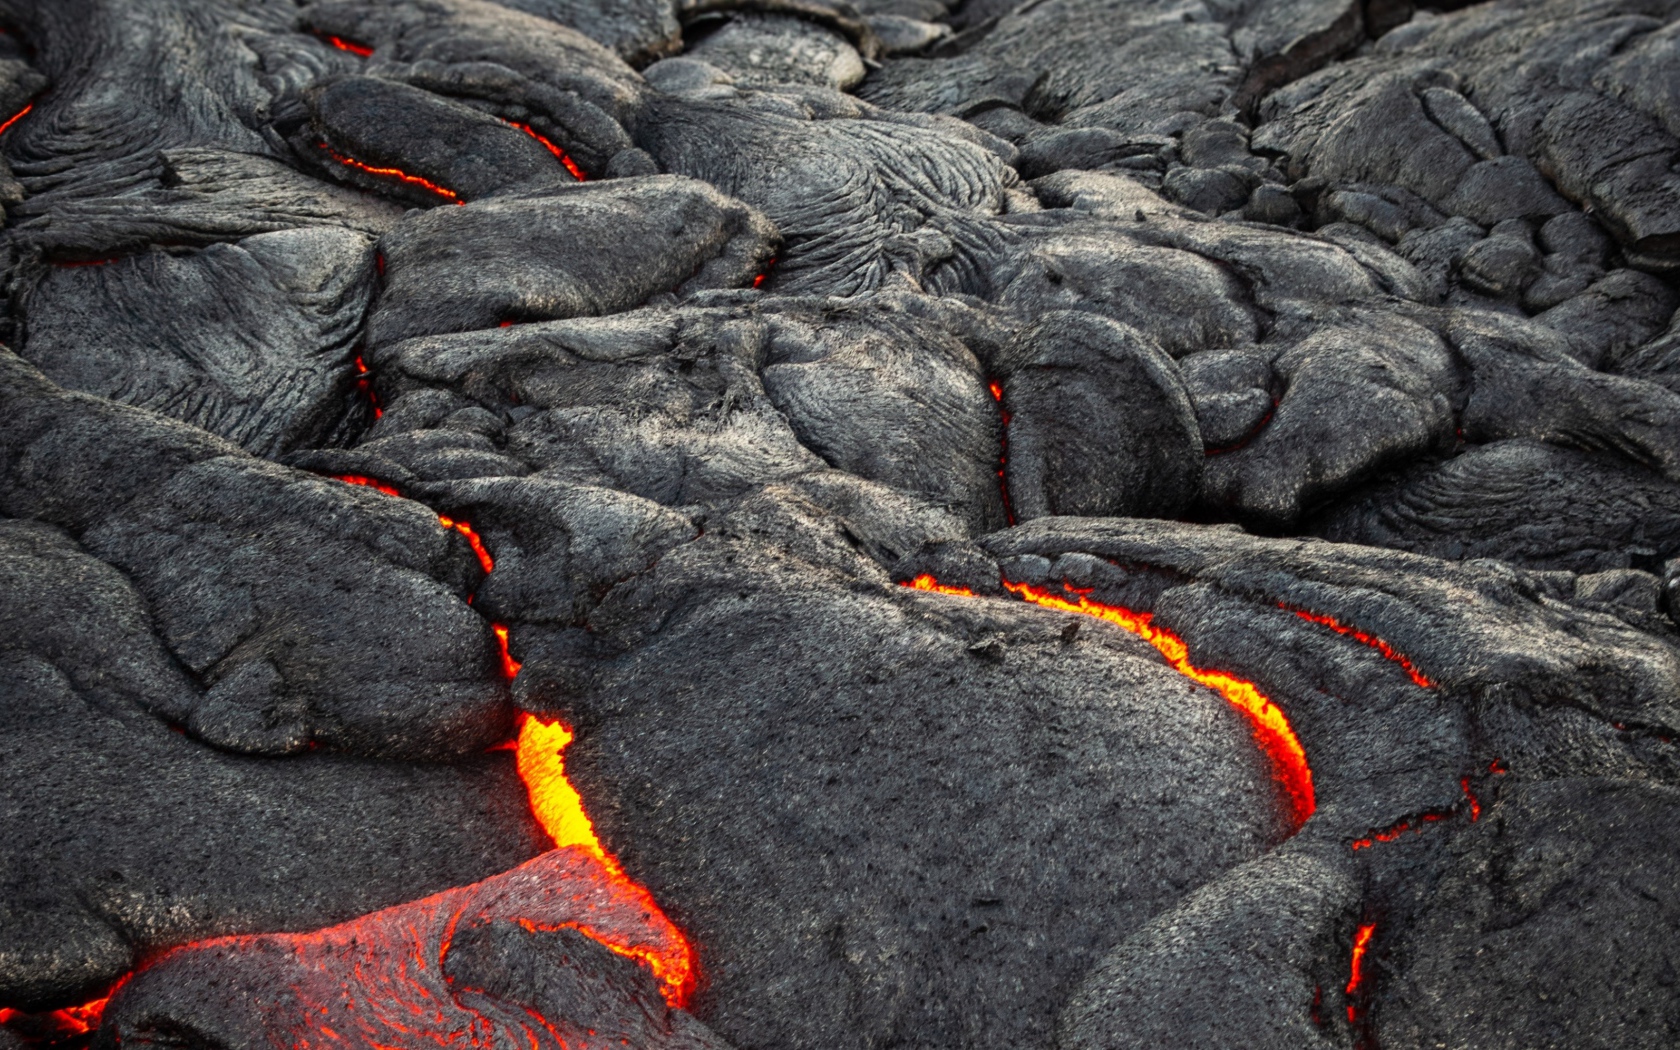 Lava makes its way through the cracks in the volcano